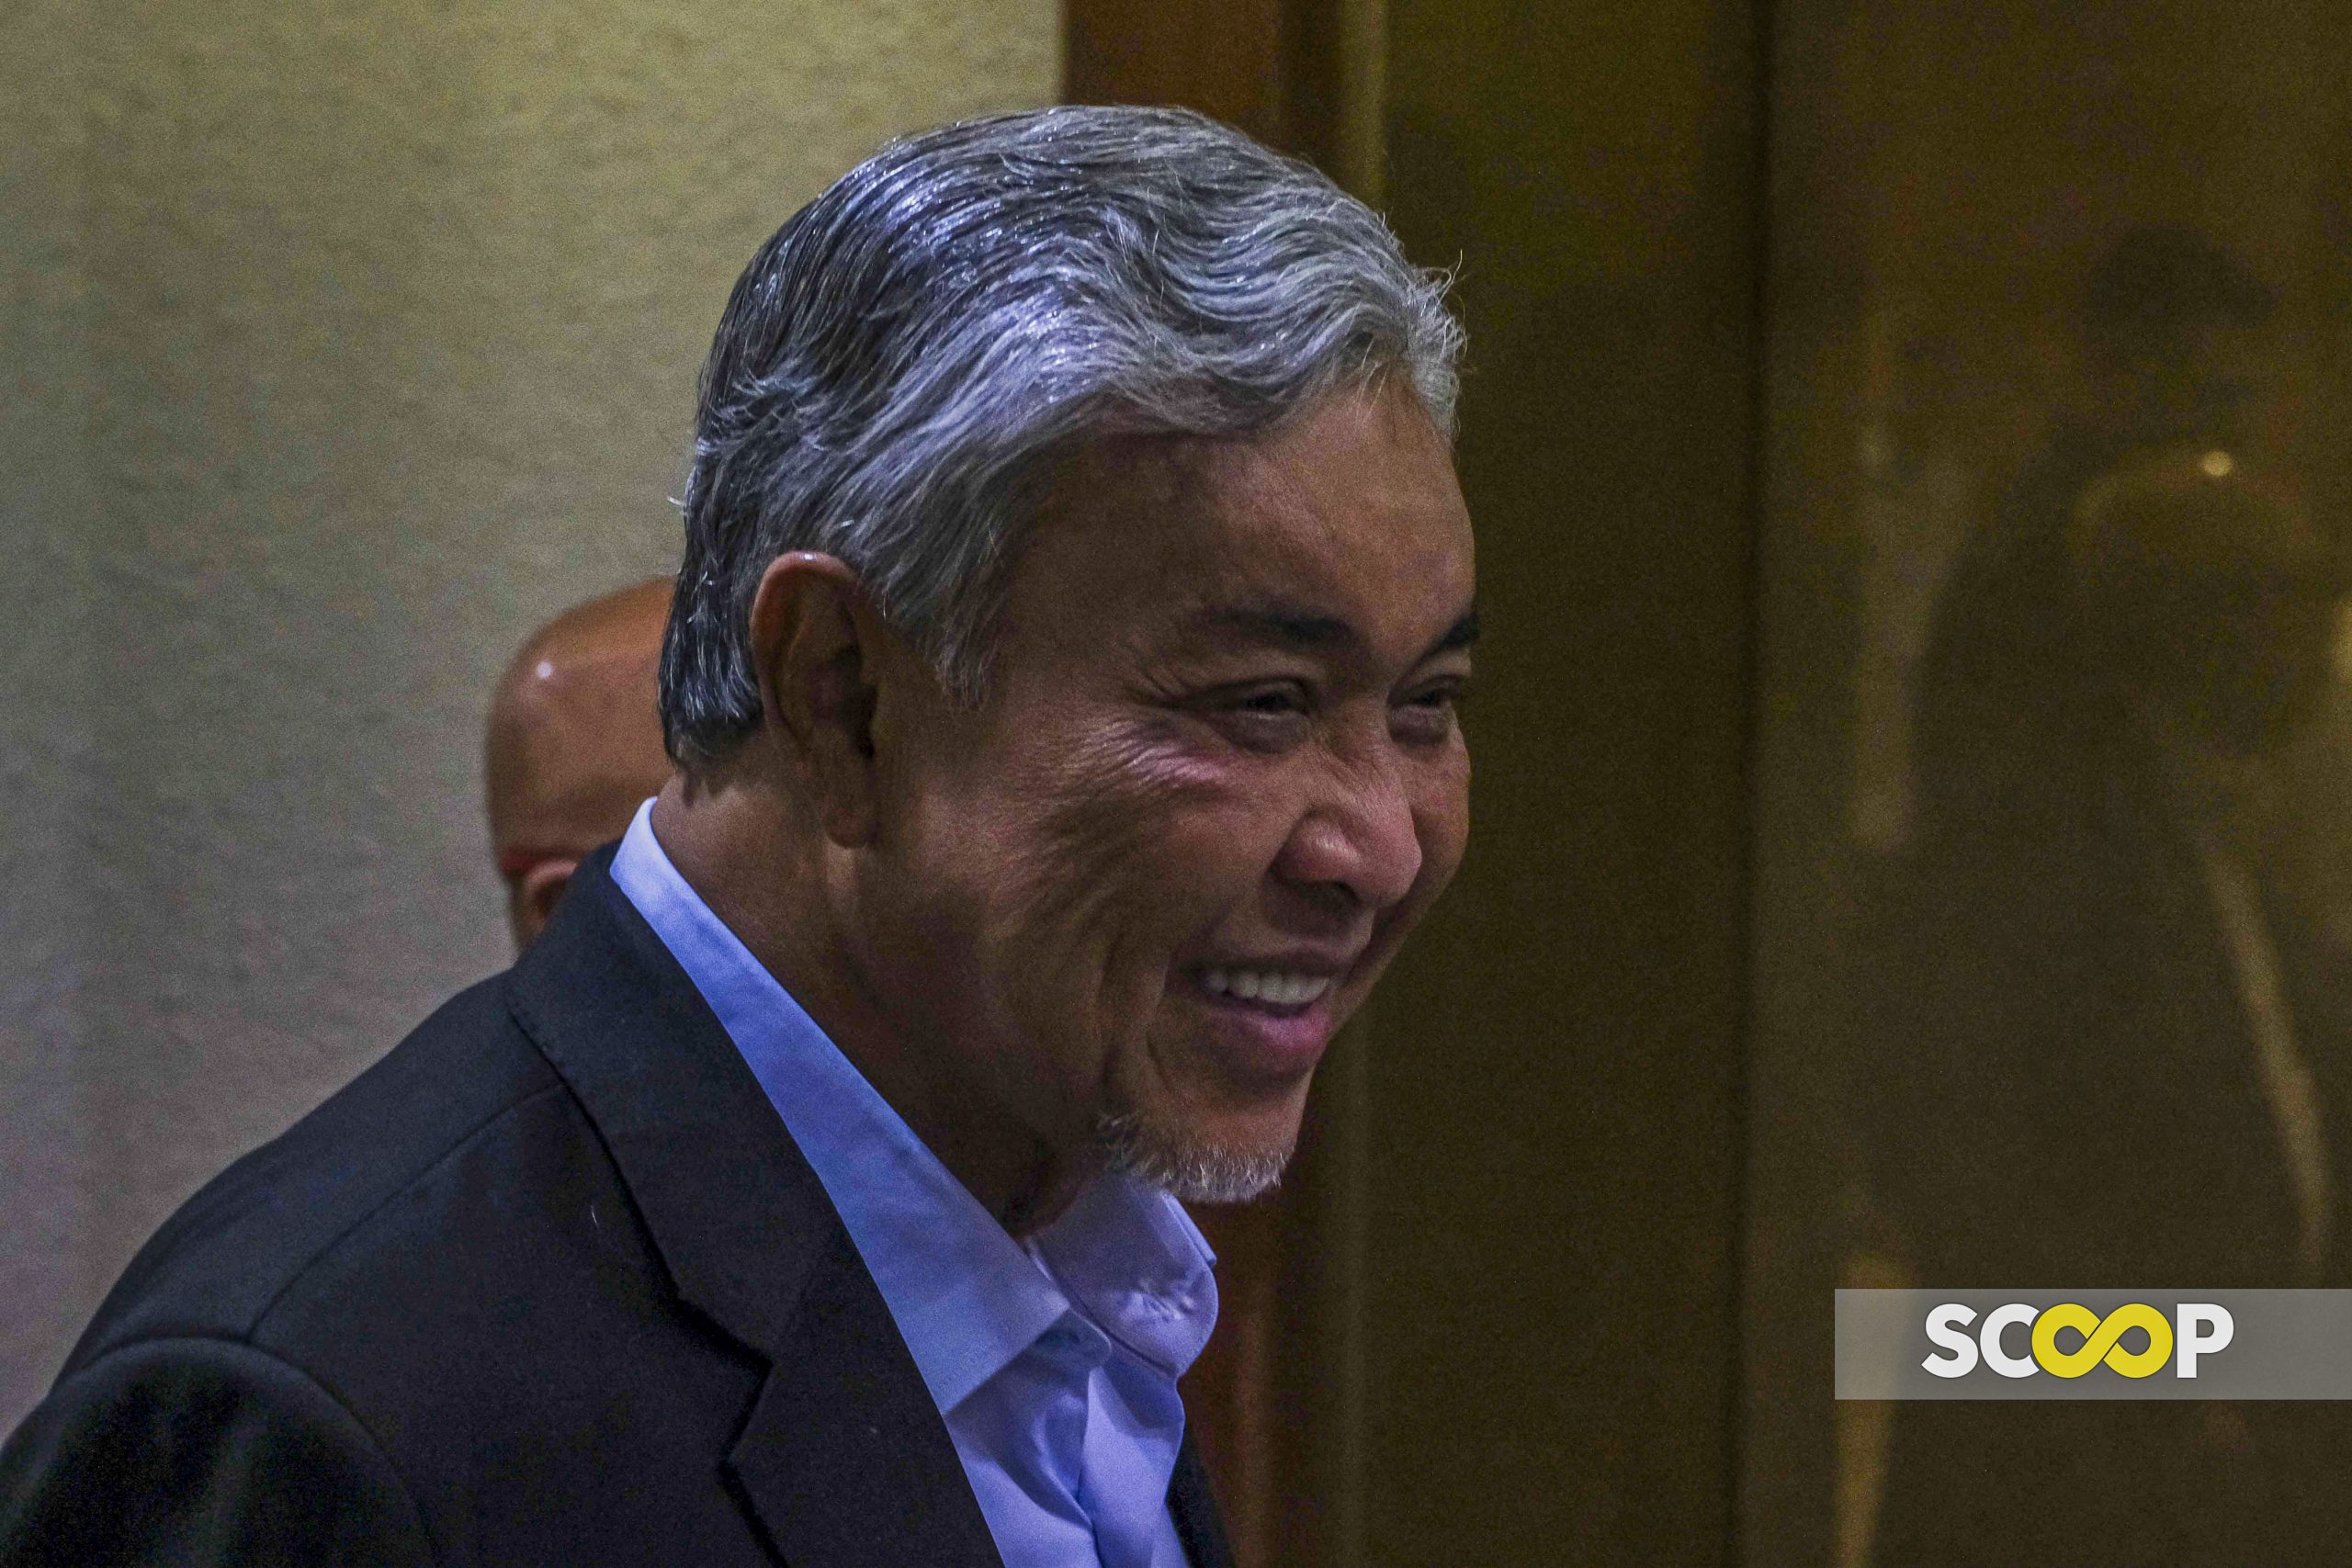 Zahid’s discharge does not mean he’s let off scot-free: lawyers explain DNAAs